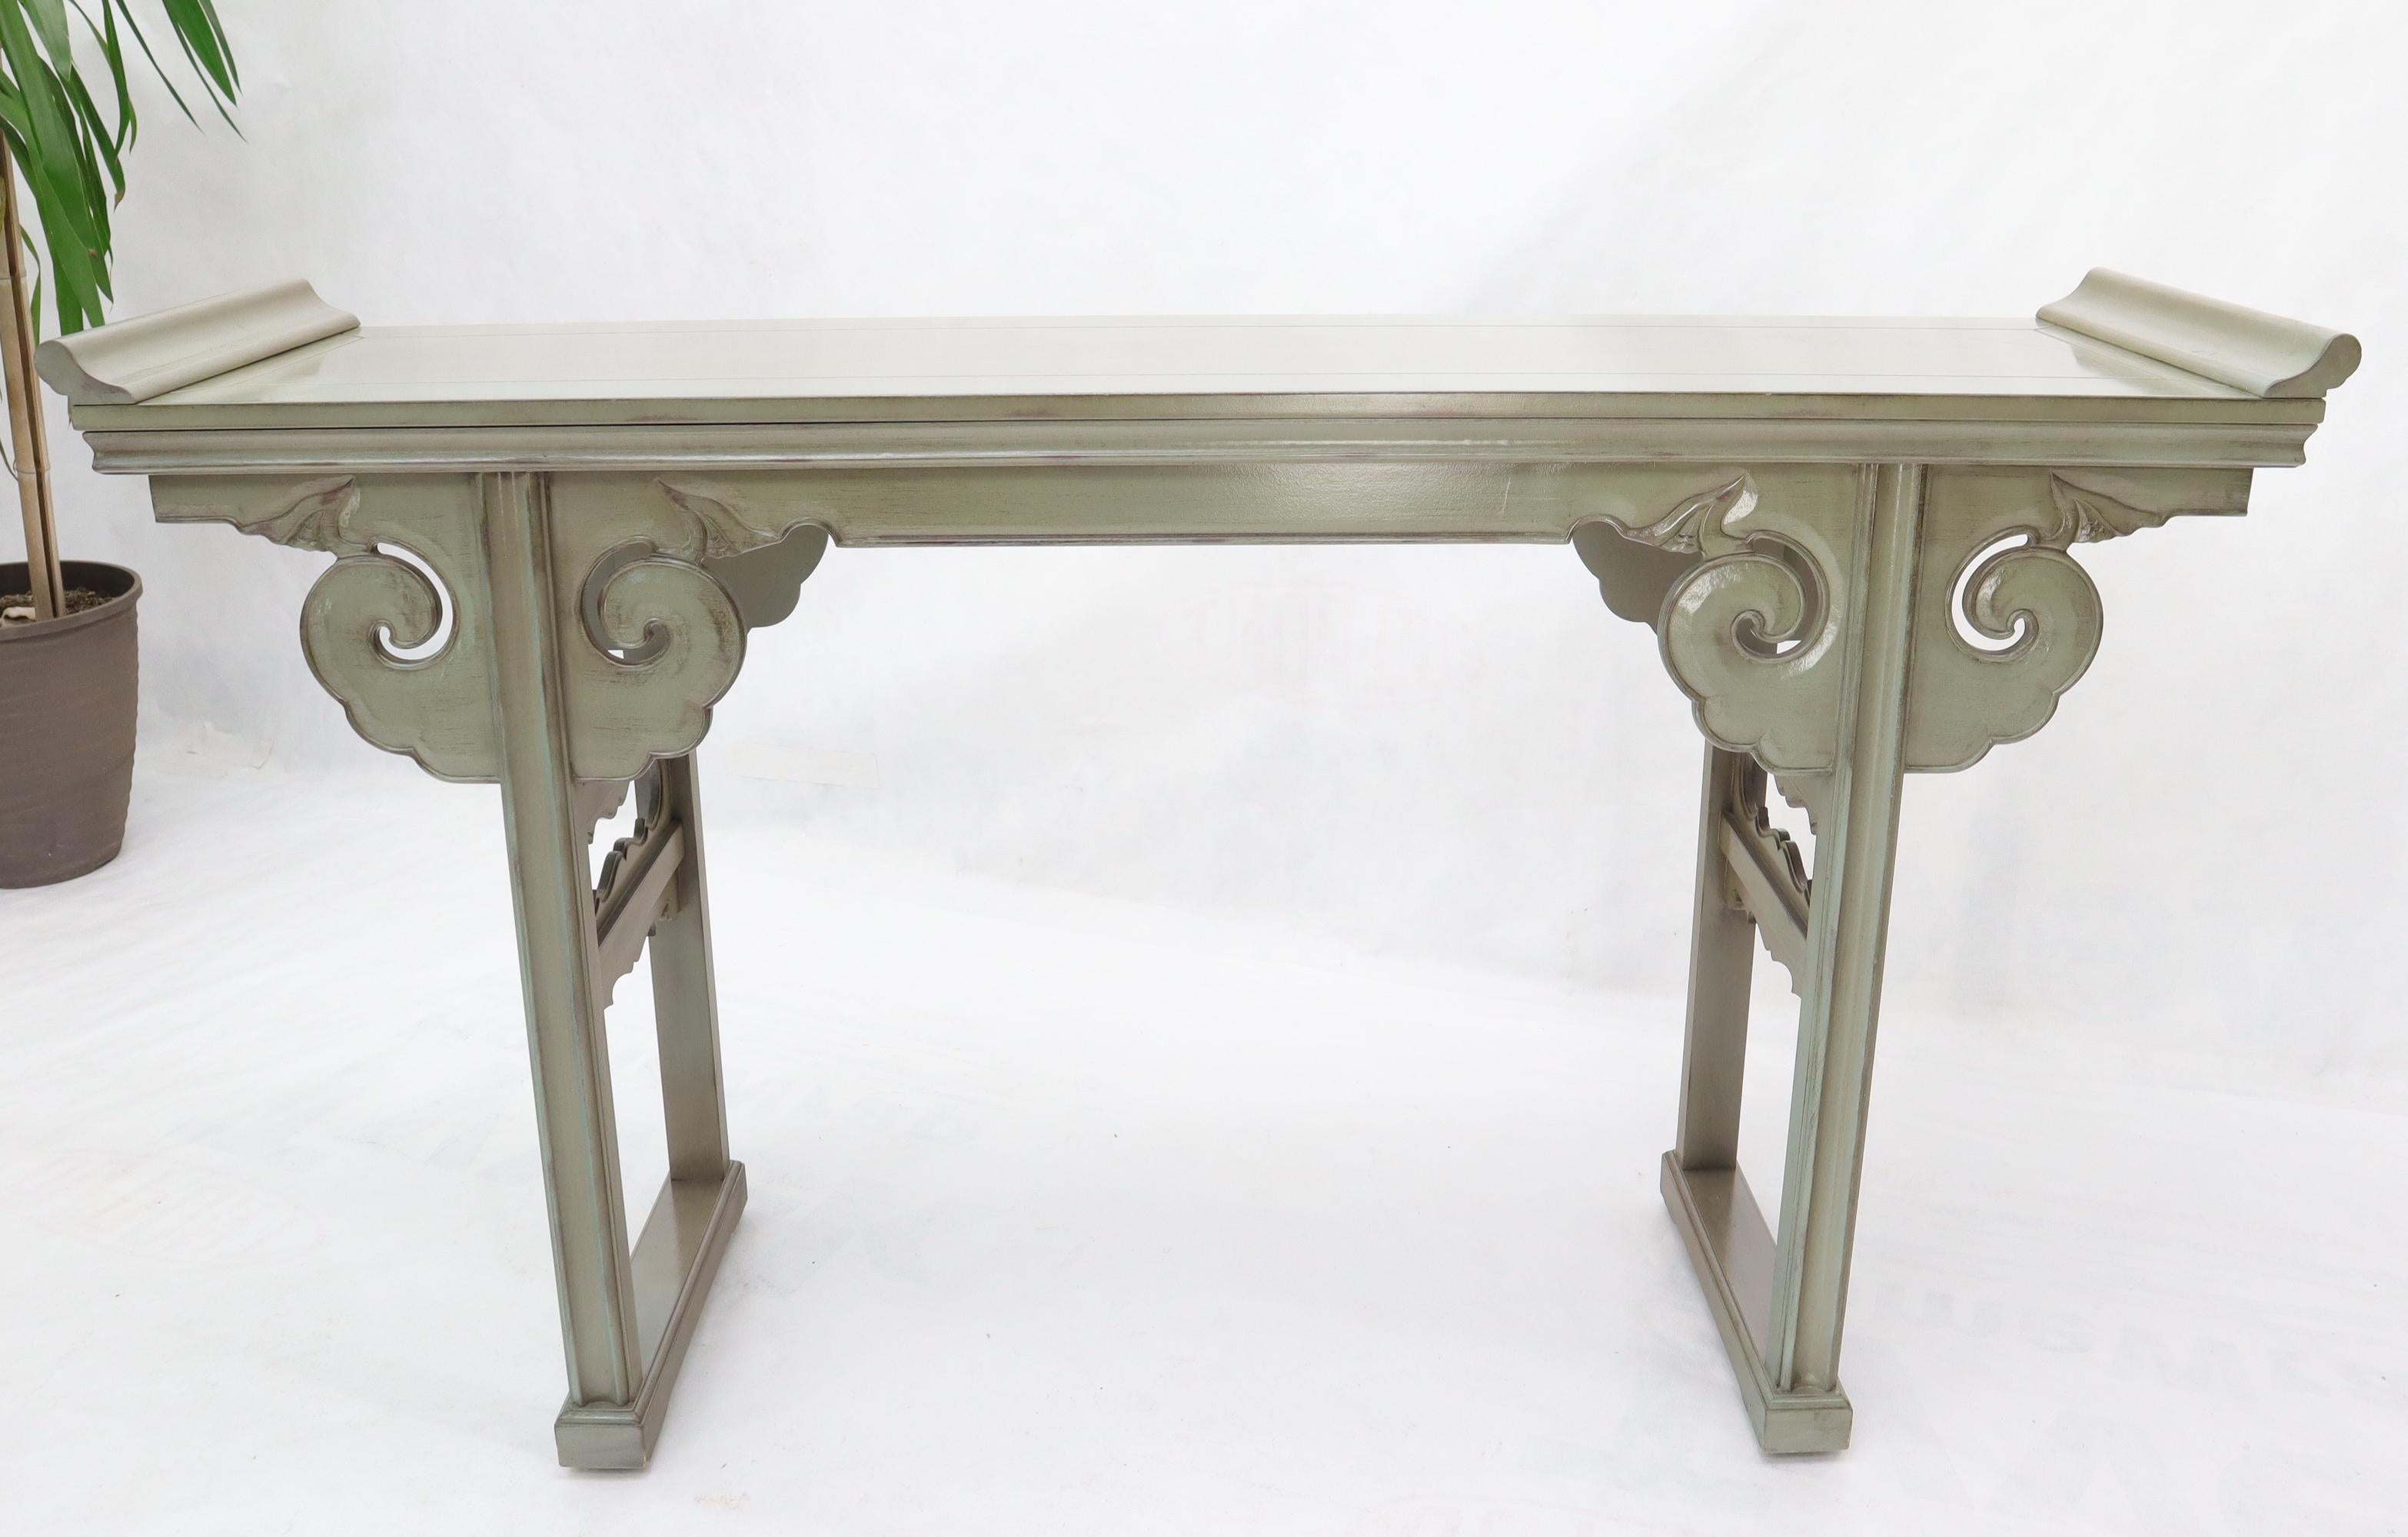 Hardwood Olive Faux Paint Enamel Finish Carved Base Console Table with Rolled Edges For Sale